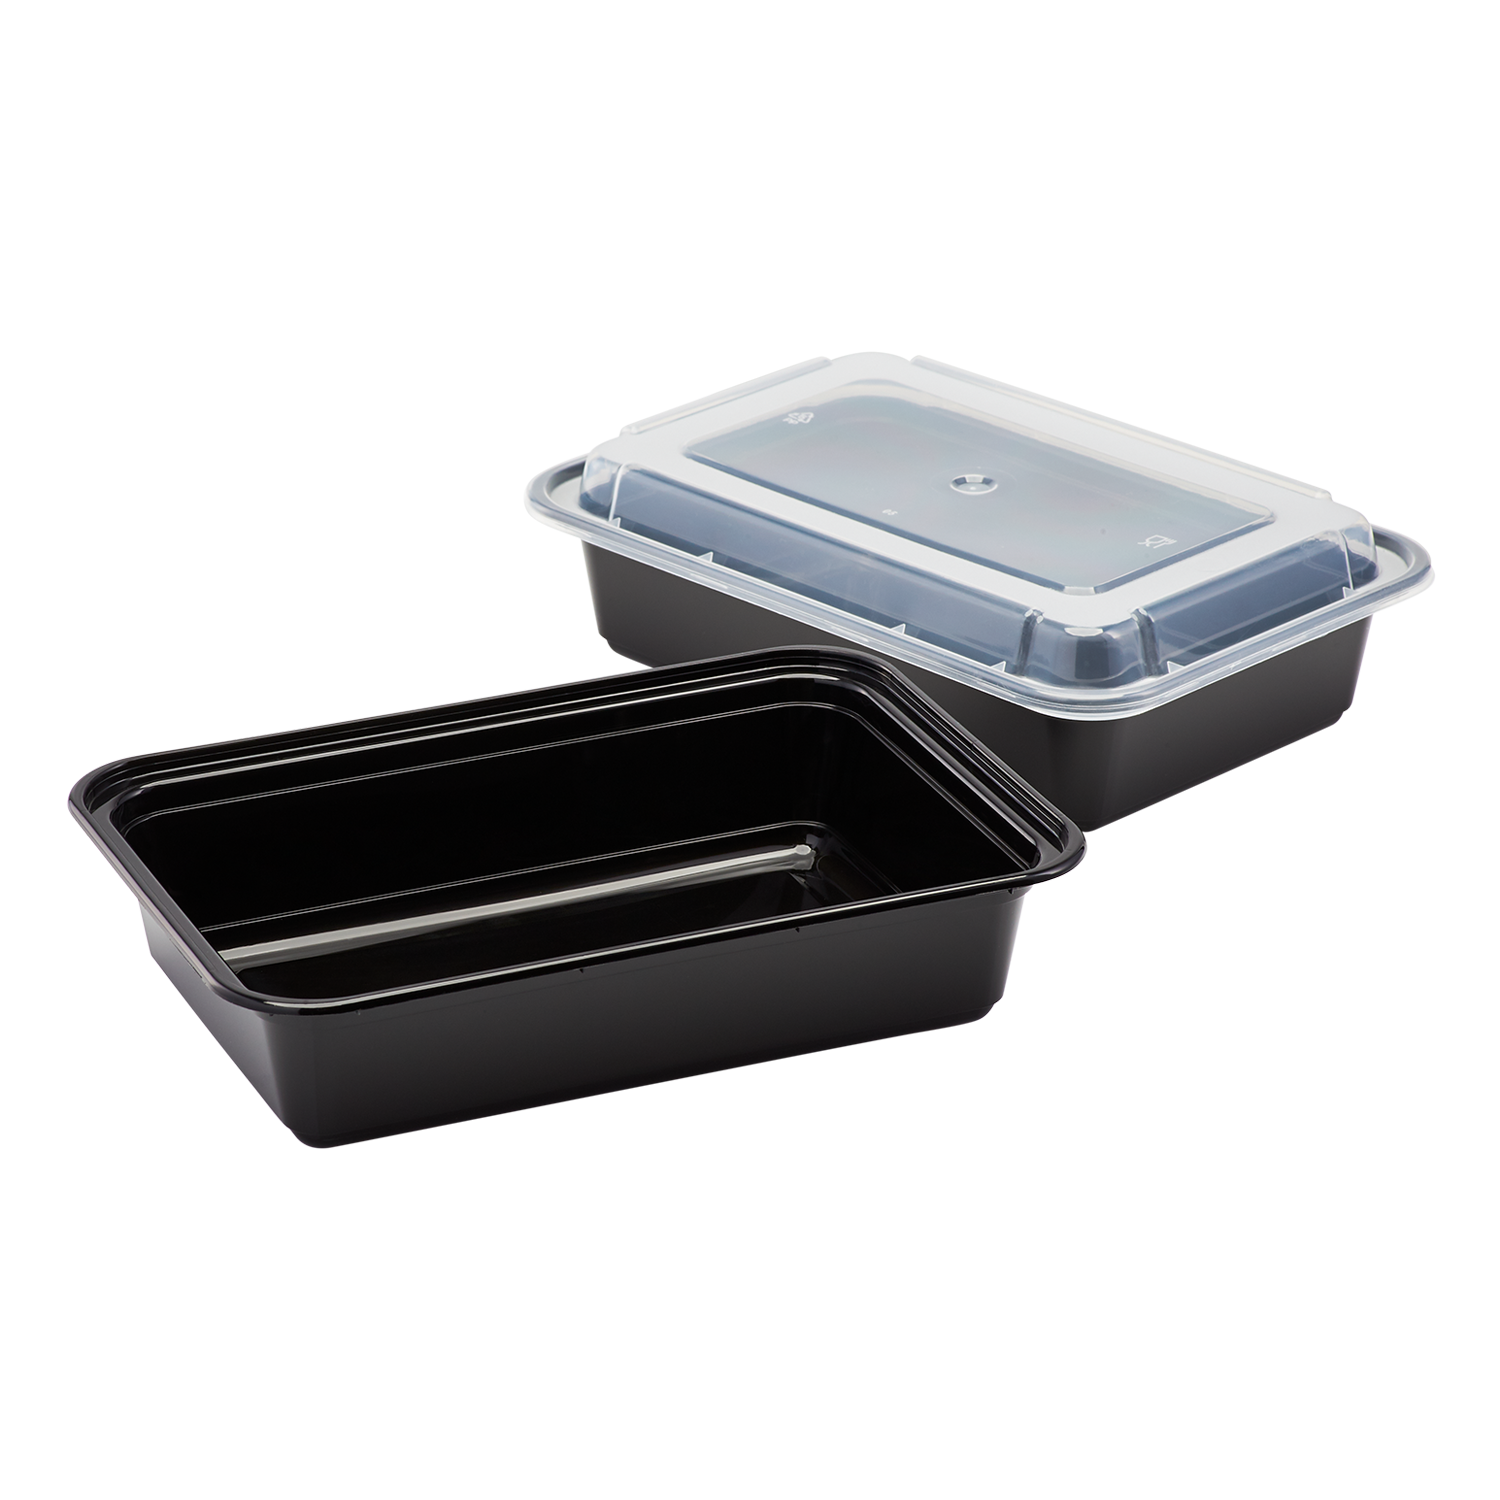 Meal Prep Microwavable Food Containers With Lids 38 Oz. 